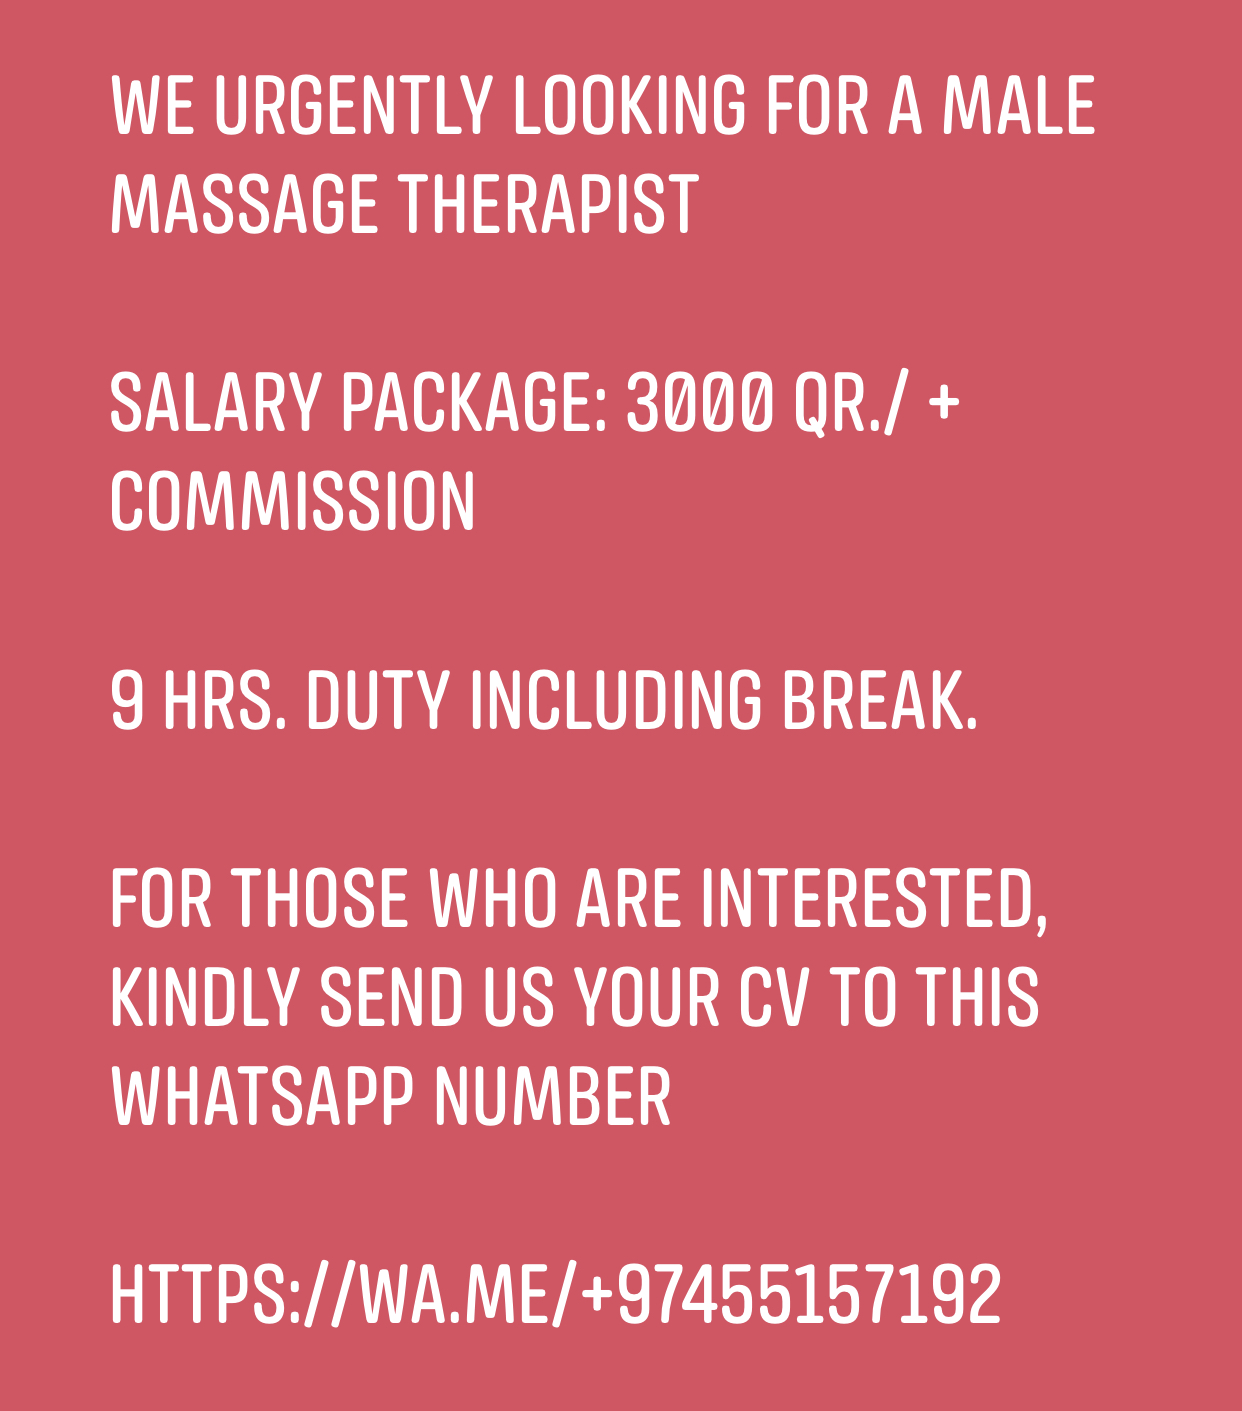 We urgently looking for a MALE MASSAGE THERAPIST